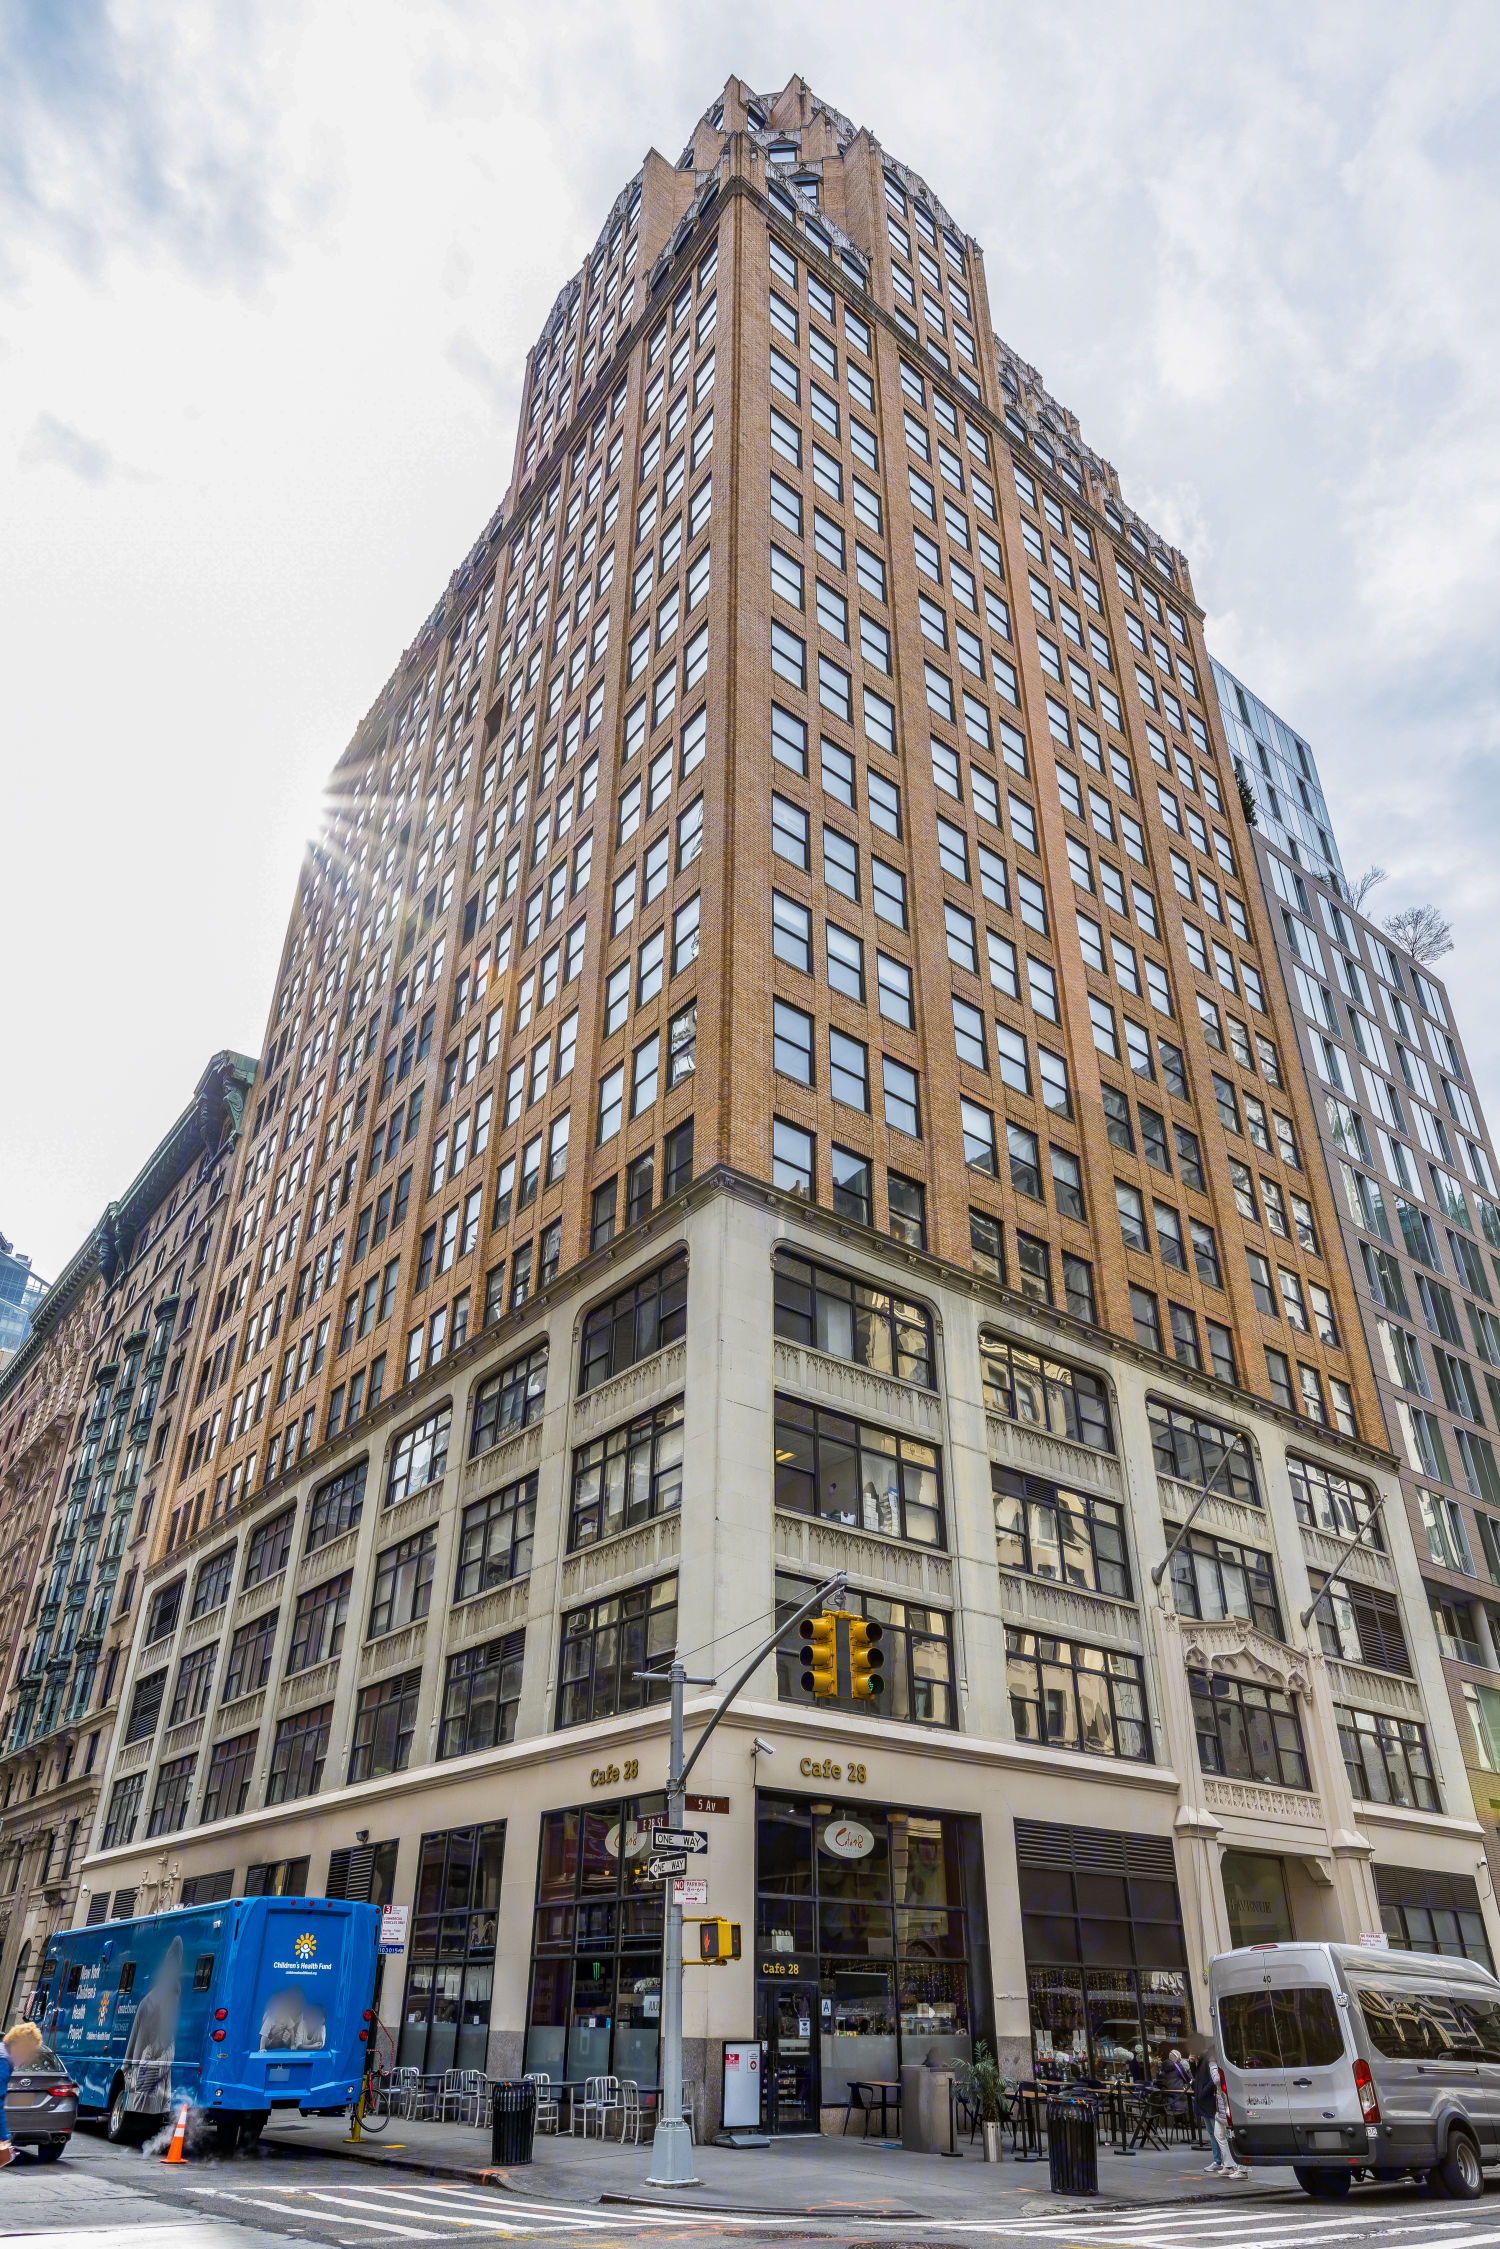 245 Fifth Avenue, New York, NY Commercial Space for Rent